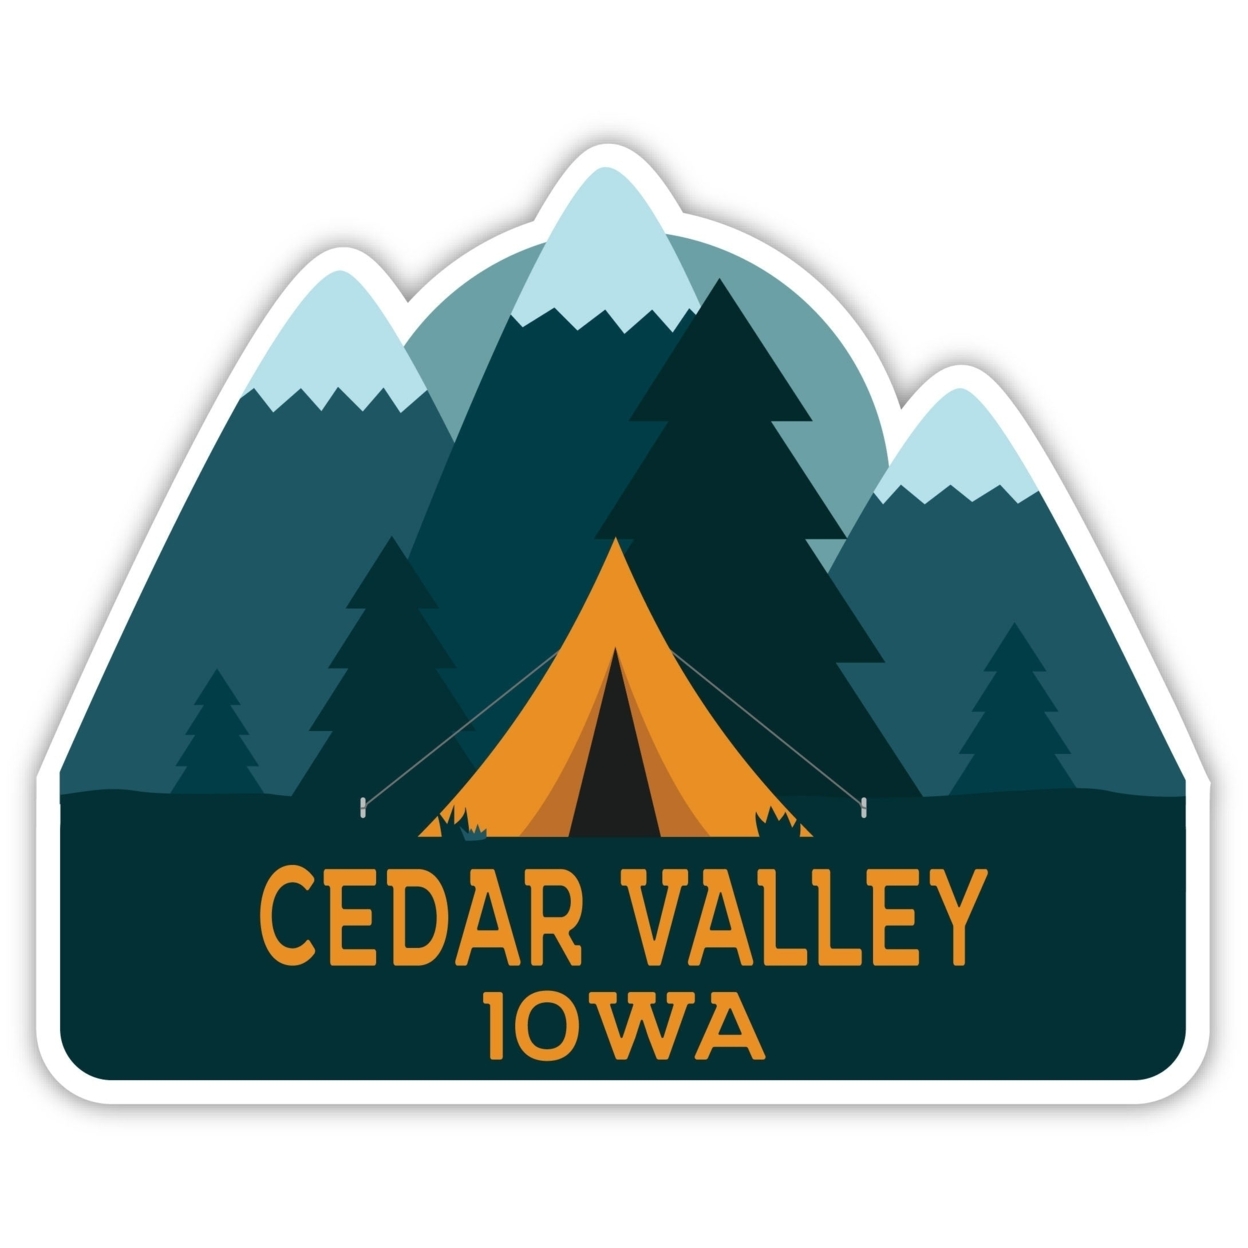 Cedar Valley Iowa Souvenir Decorative Stickers (Choose Theme And Size) - 4-Pack, 12-Inch, Tent